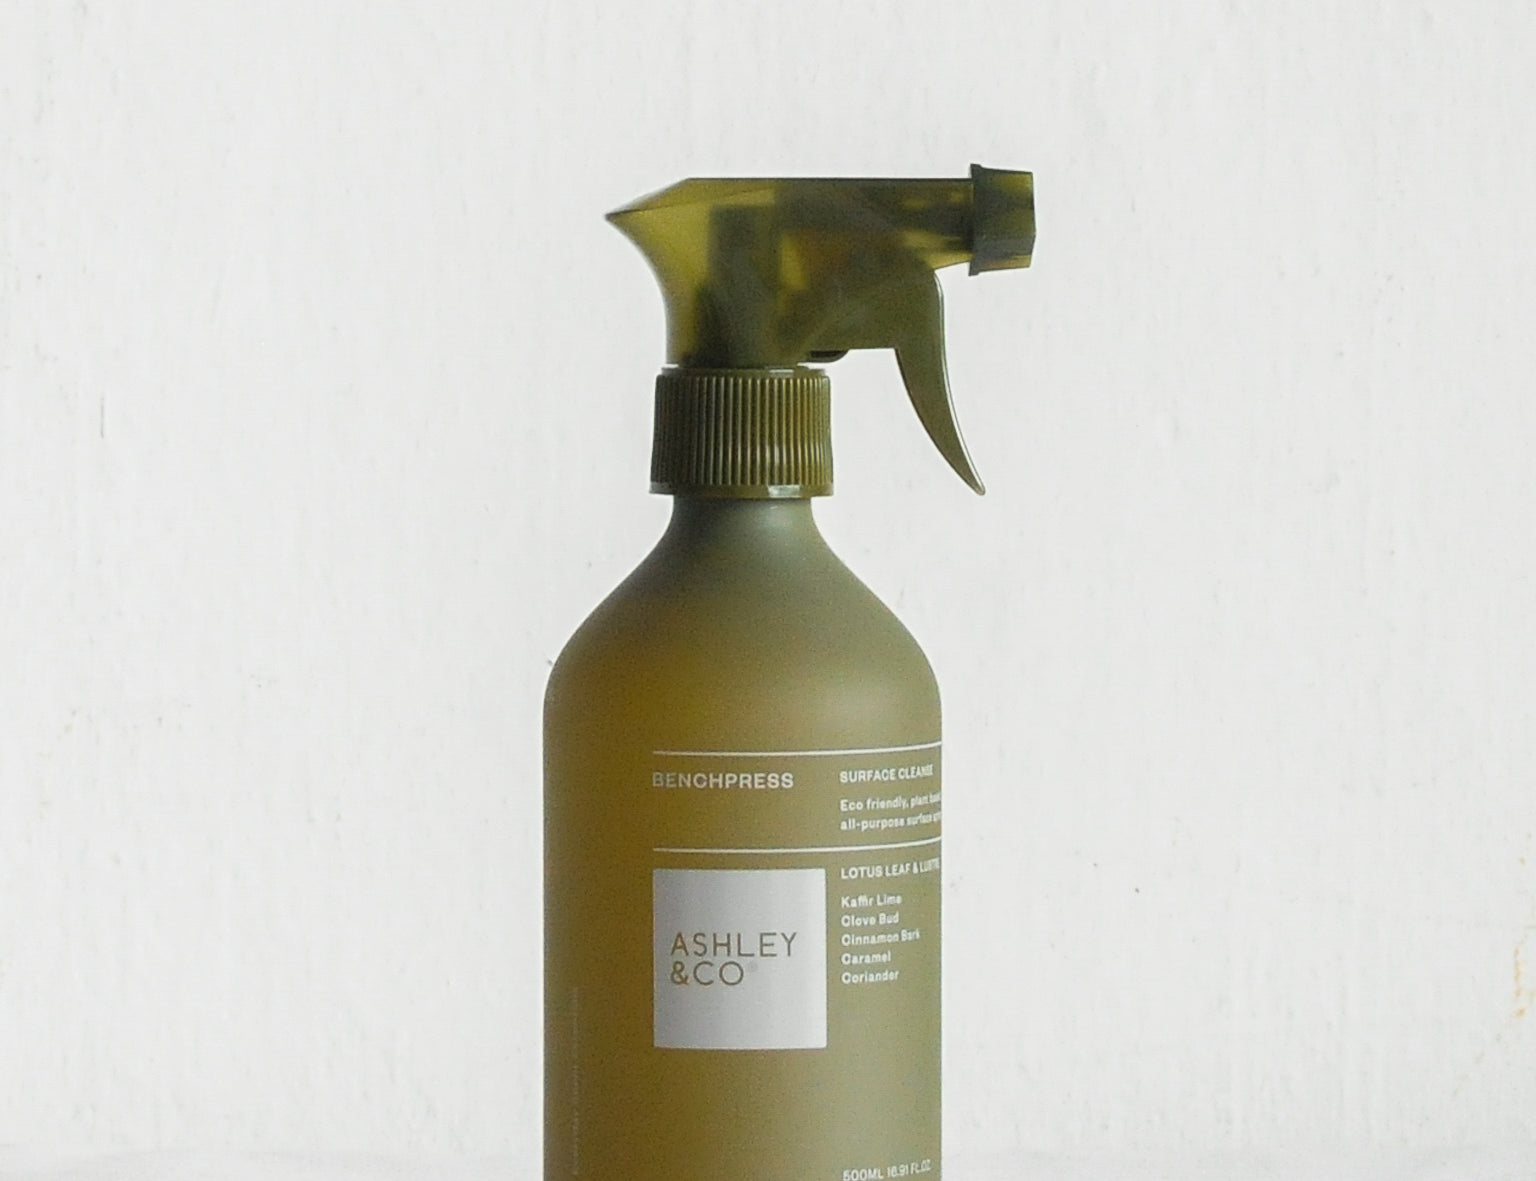 Ashley & Co BenchPress Surface Cleanse 500ml, a biodegradable multipurpose surface spray